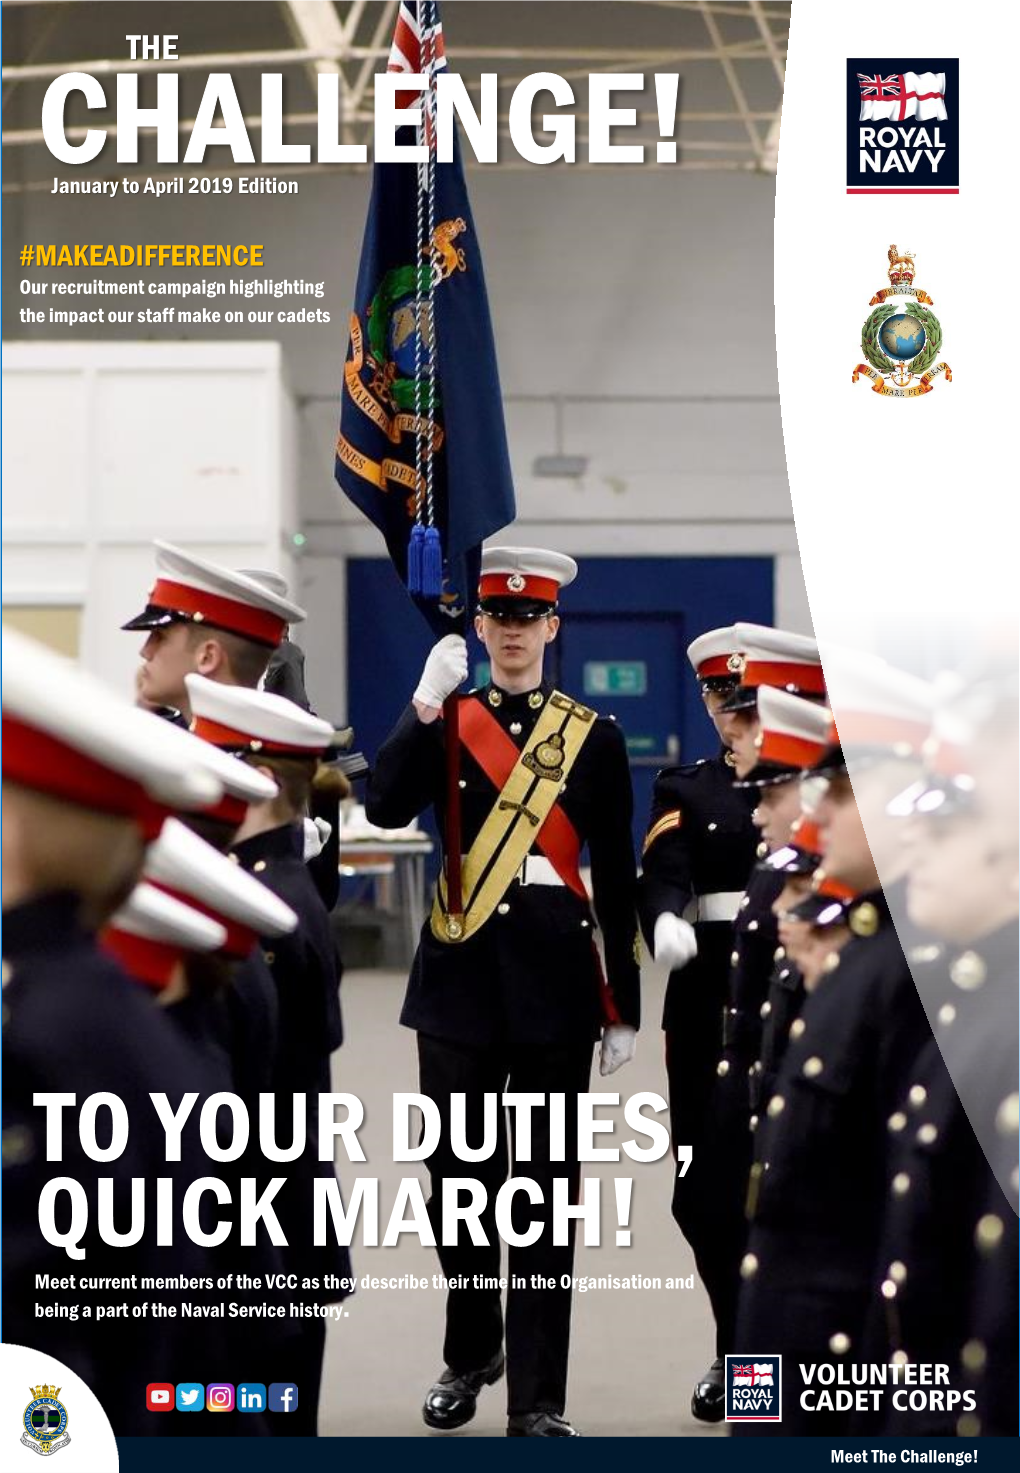 TO YOUR DUTIES, QUICK MARCH! Meet Current Members of the VCC As They Describe Their Time in the Organisation and Being a Part of the Naval Service History